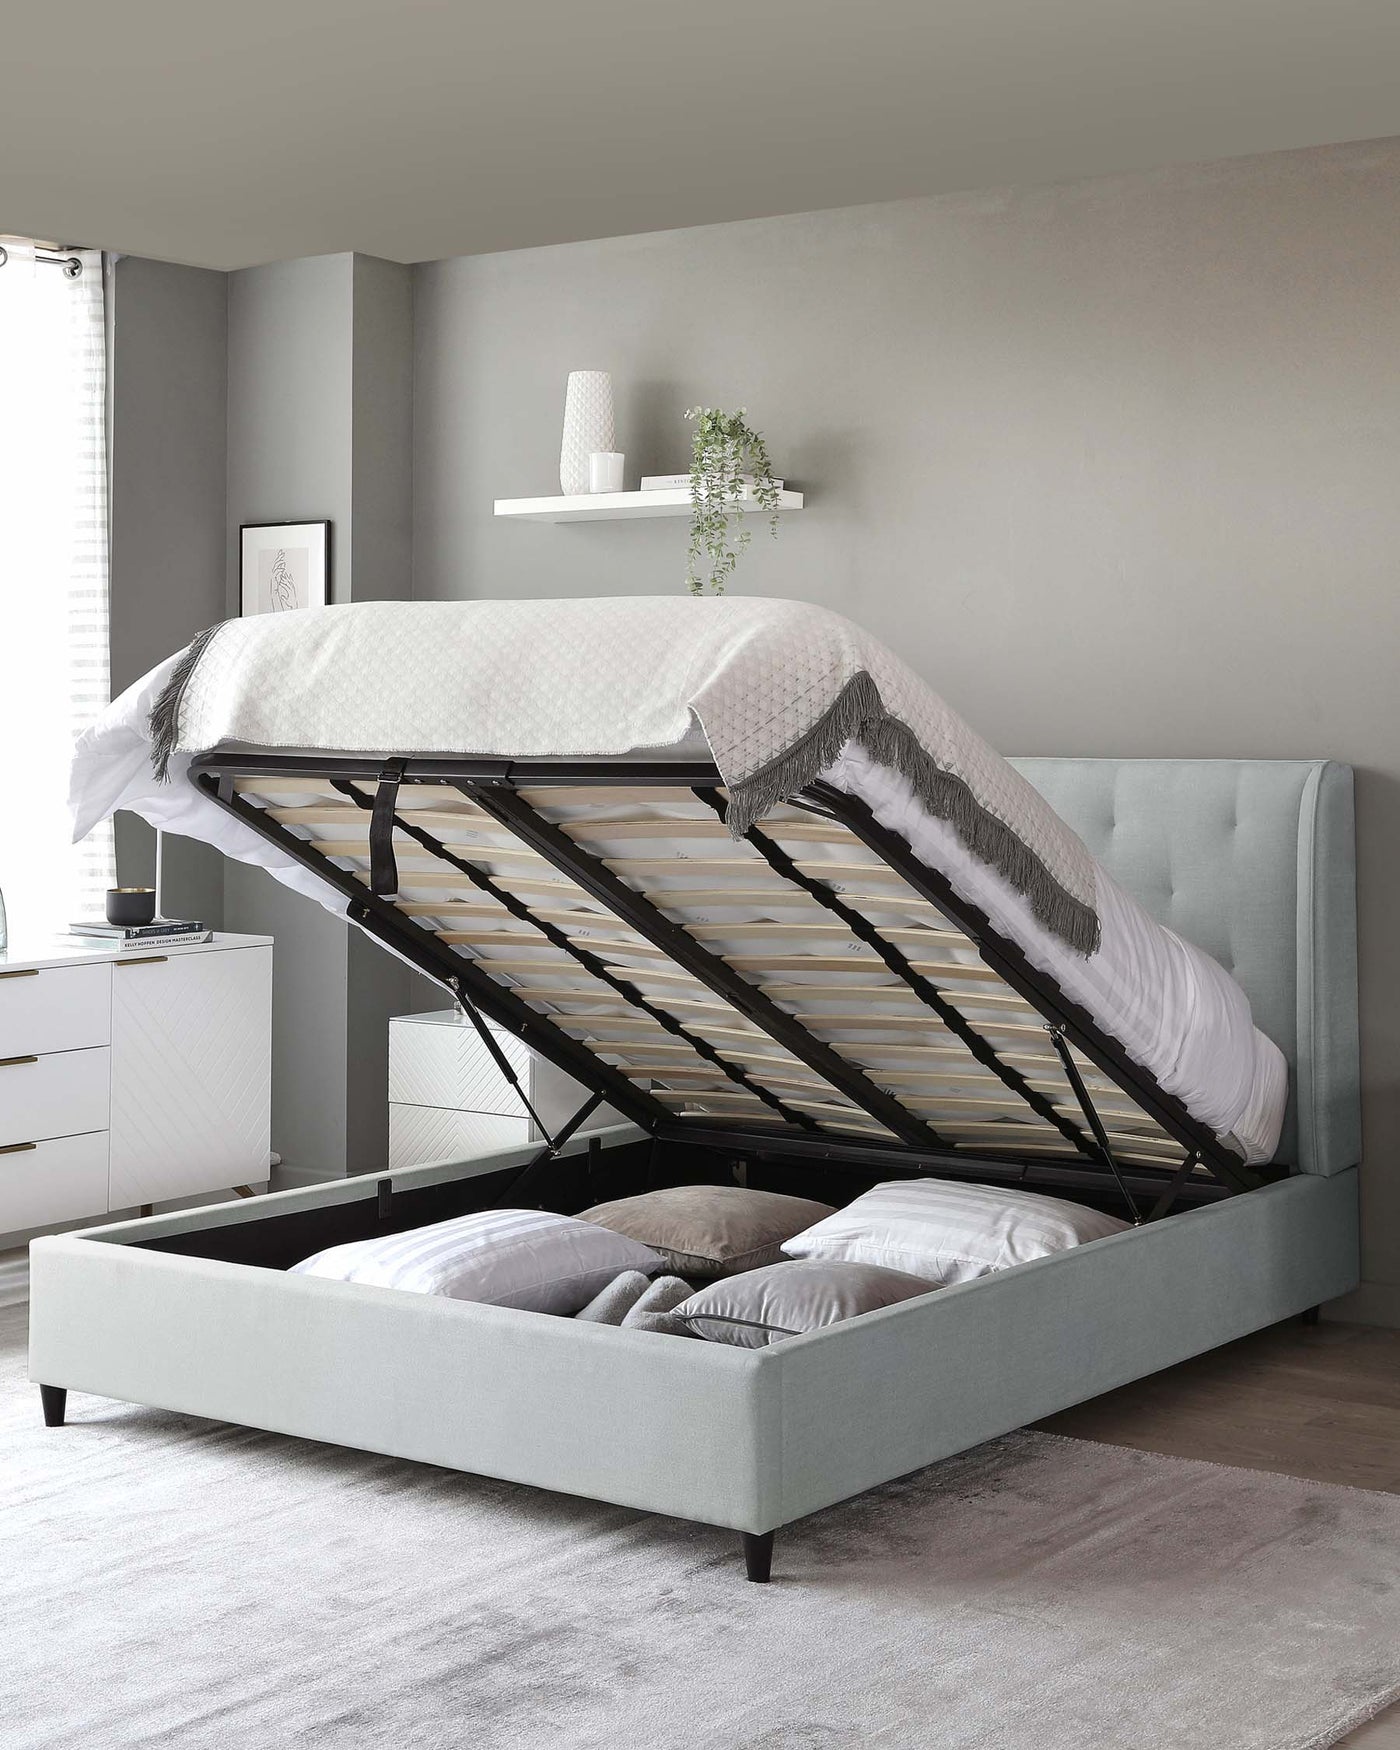 Gray upholstered platform bed with a lifting frame revealing under-bed storage, paired with a white nightstand boasting a geometric design and black accents. The bed is complemented by a soft grey textured area rug beneath it.